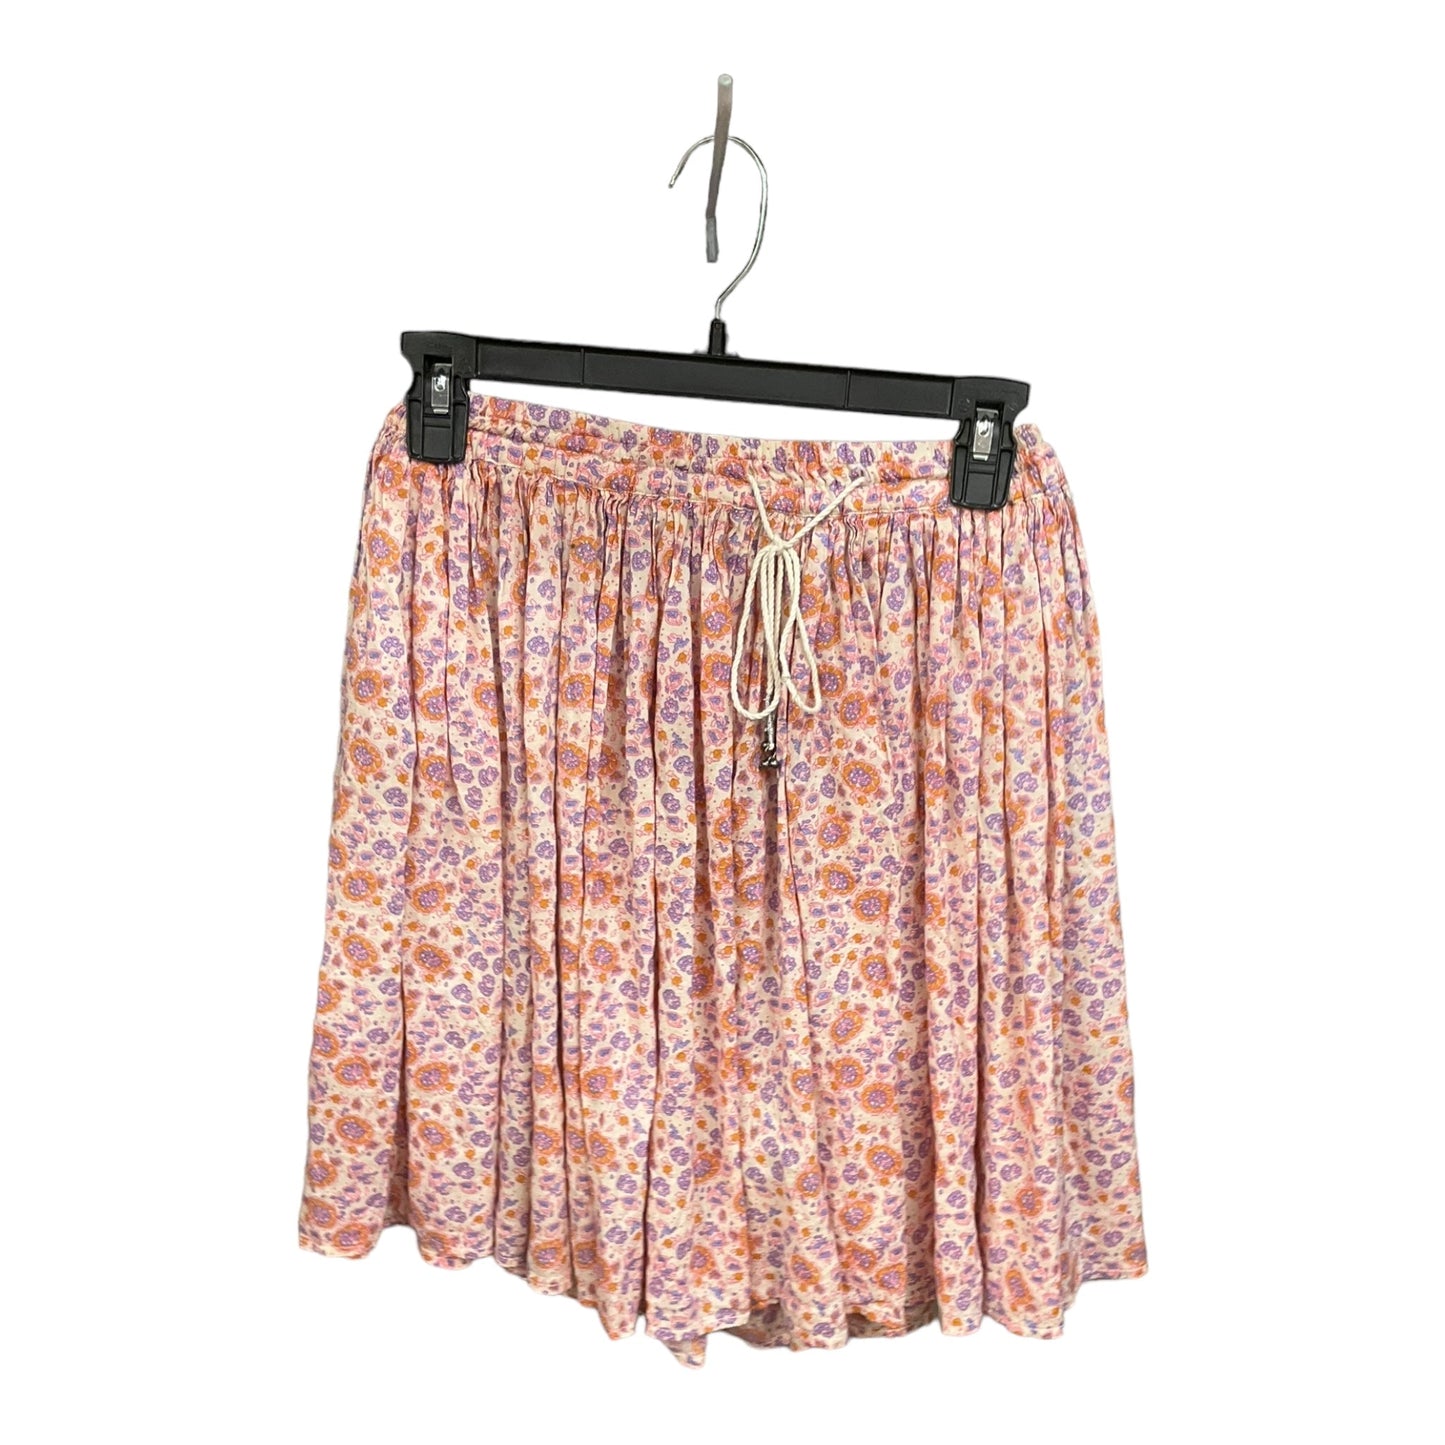 Floral Print Shorts Free People, Size Xs